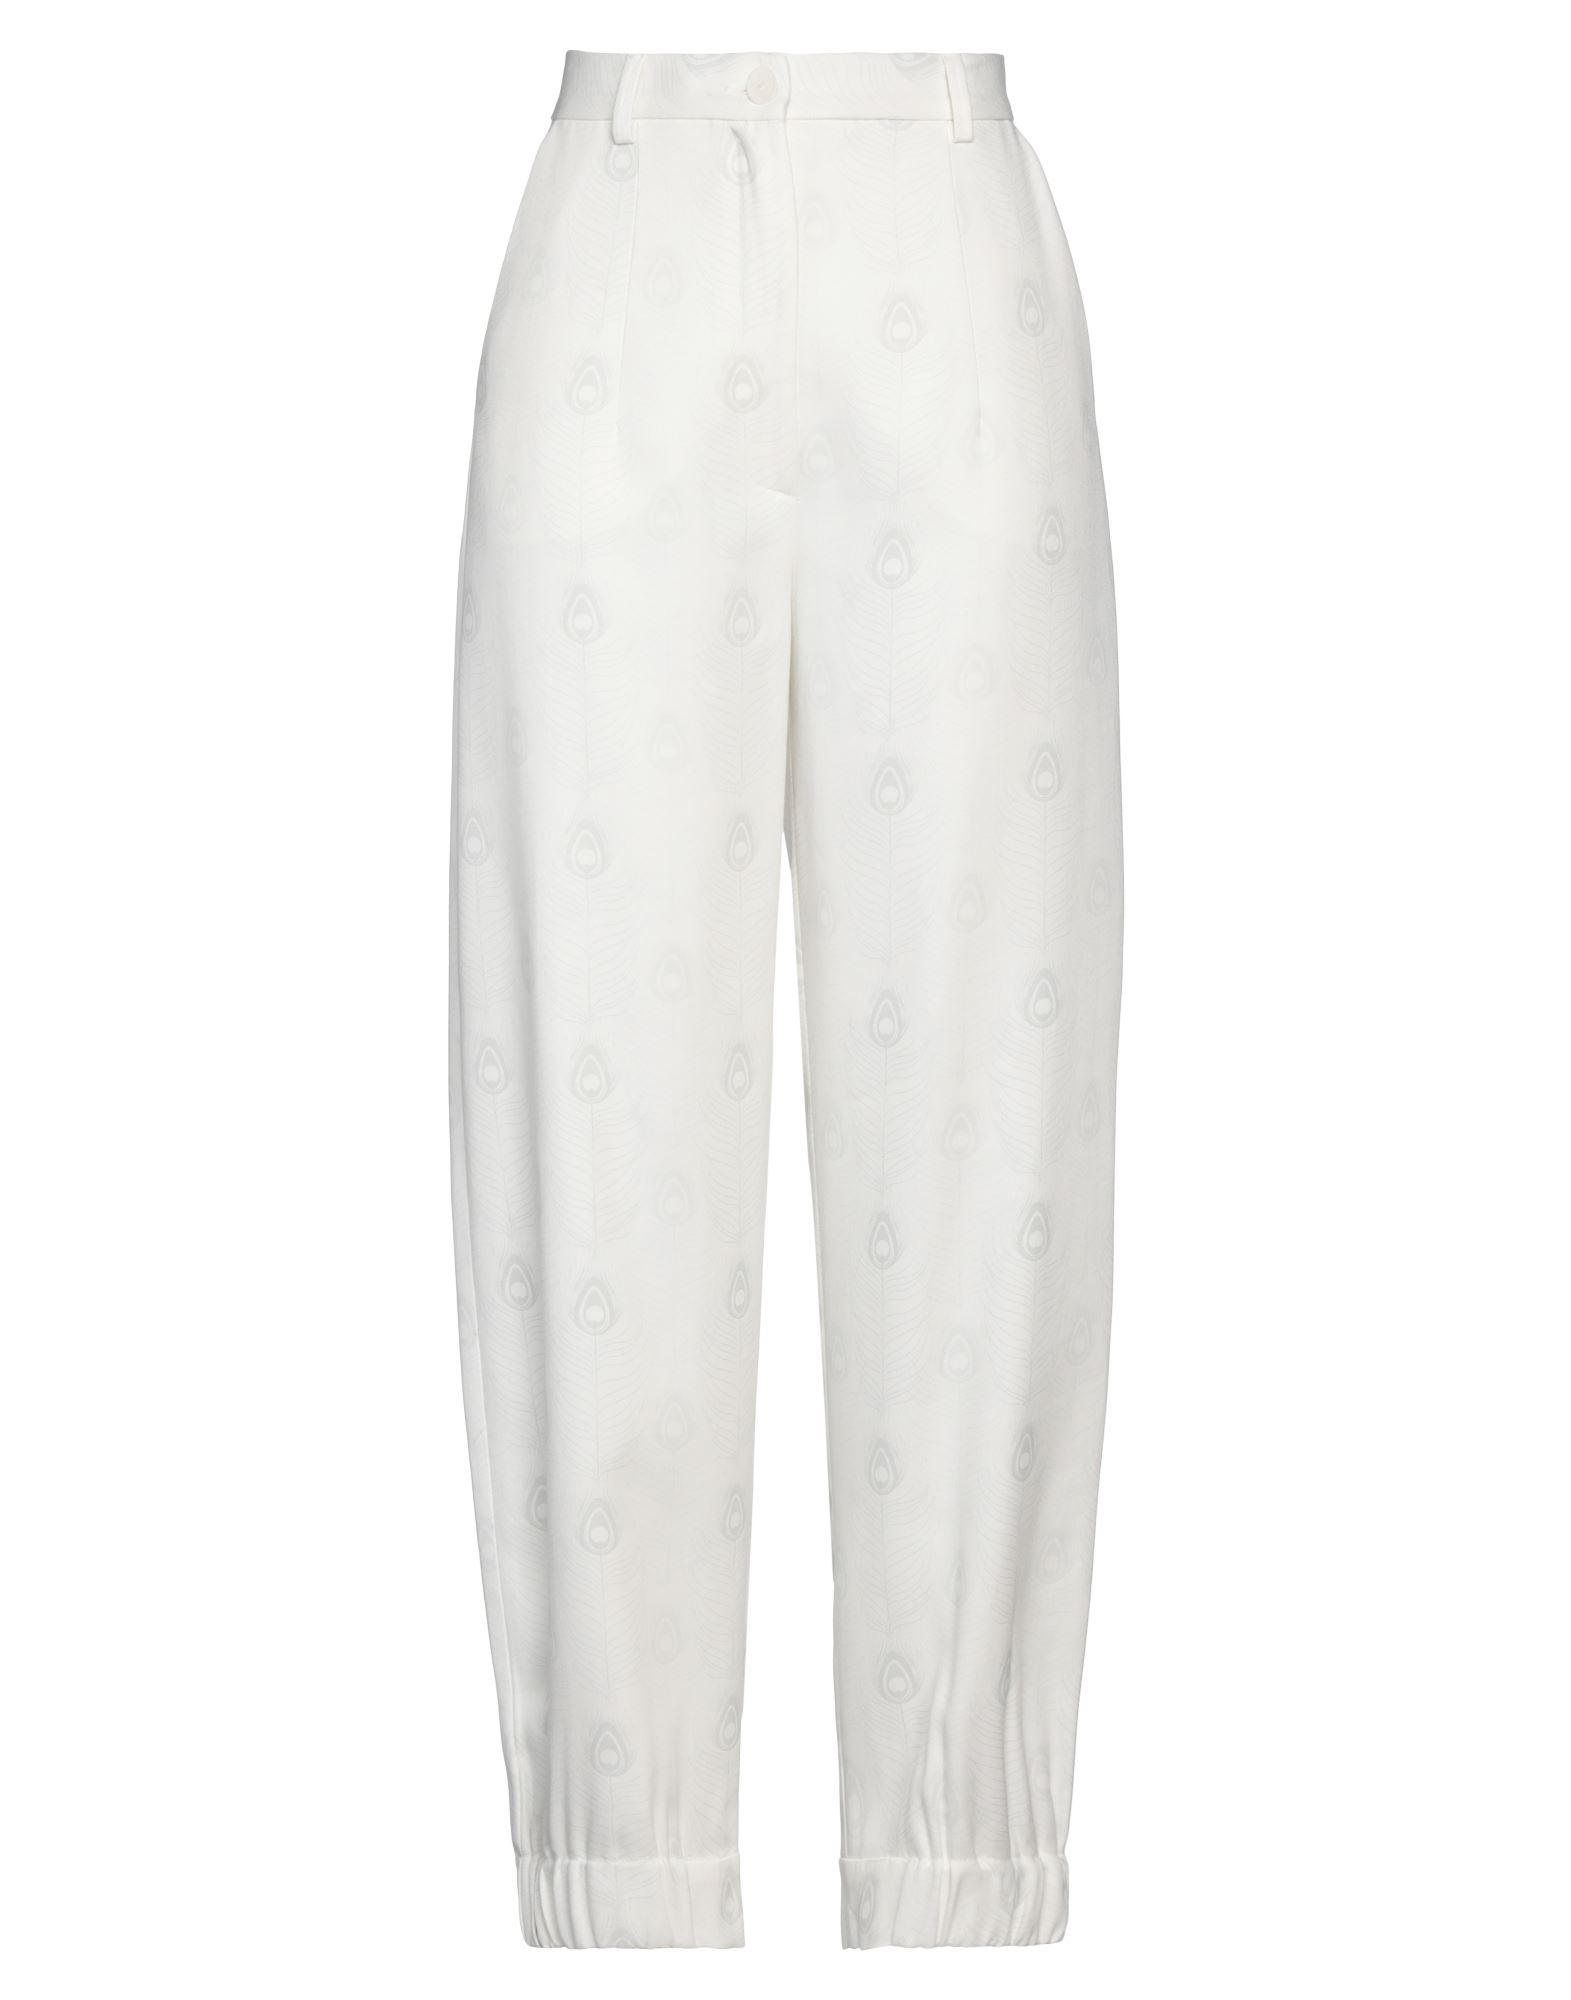 Dependance Pants In White